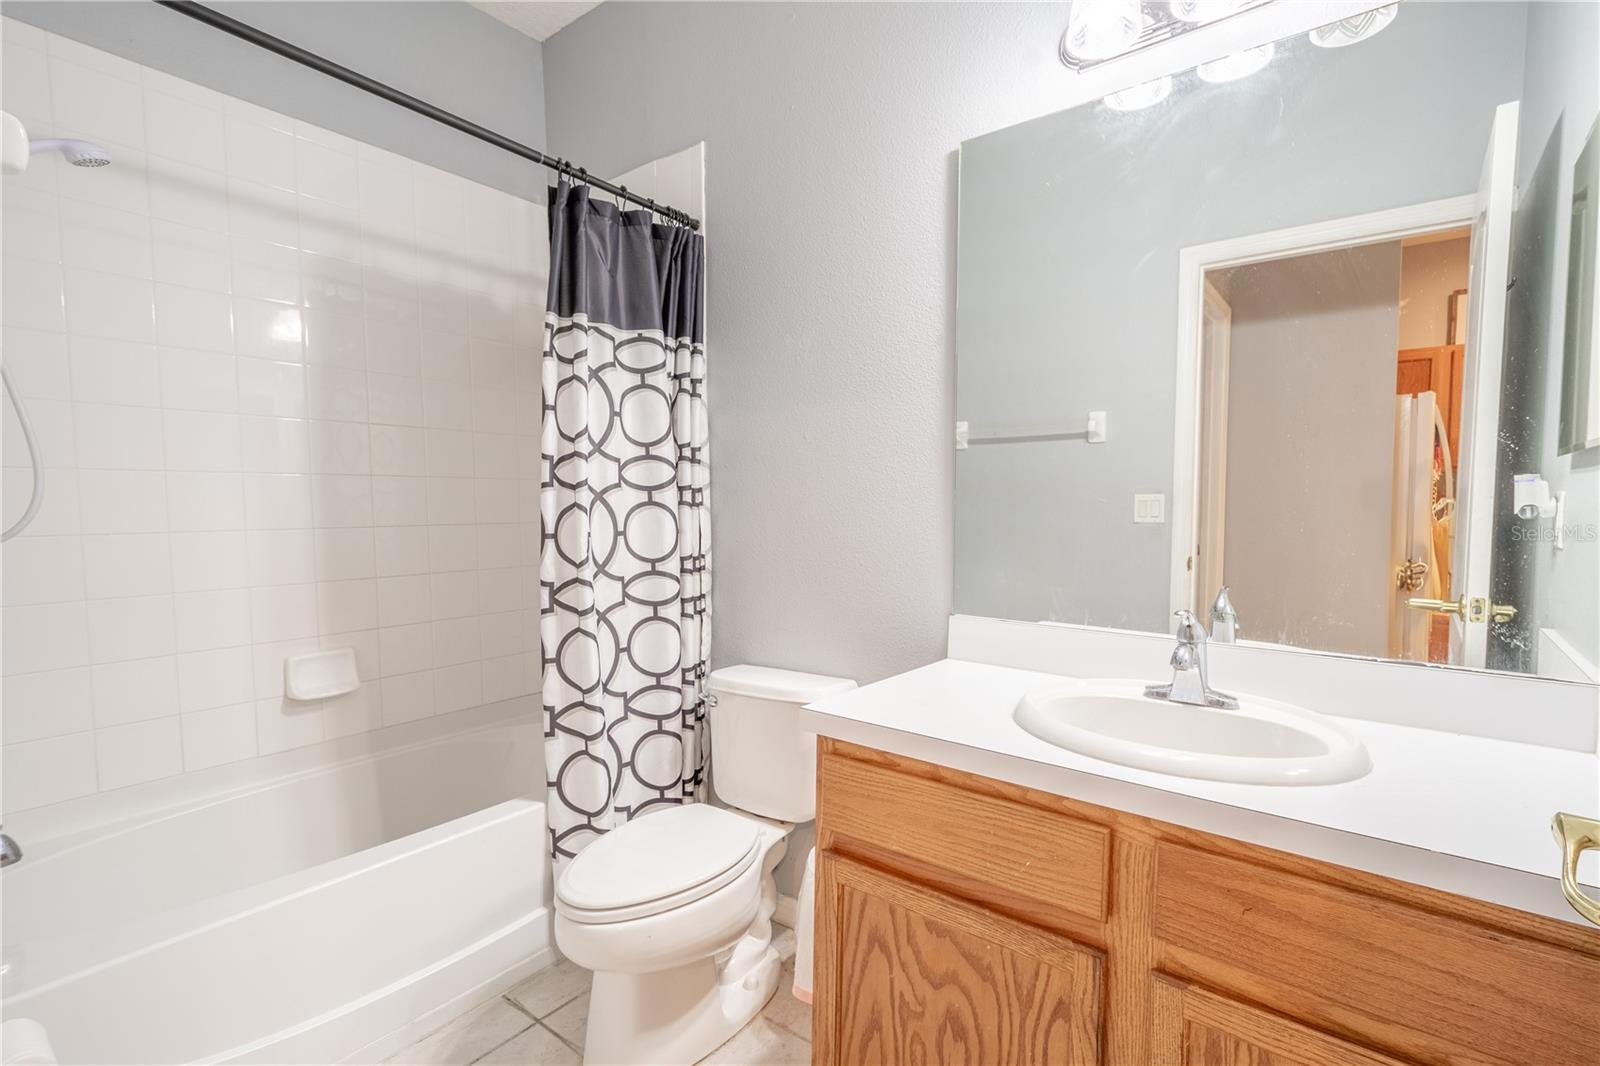 Bathroom 3 is on the first floor. It has ceramic tile flooring, a tub with shower, and a mirrored vanity with storage.